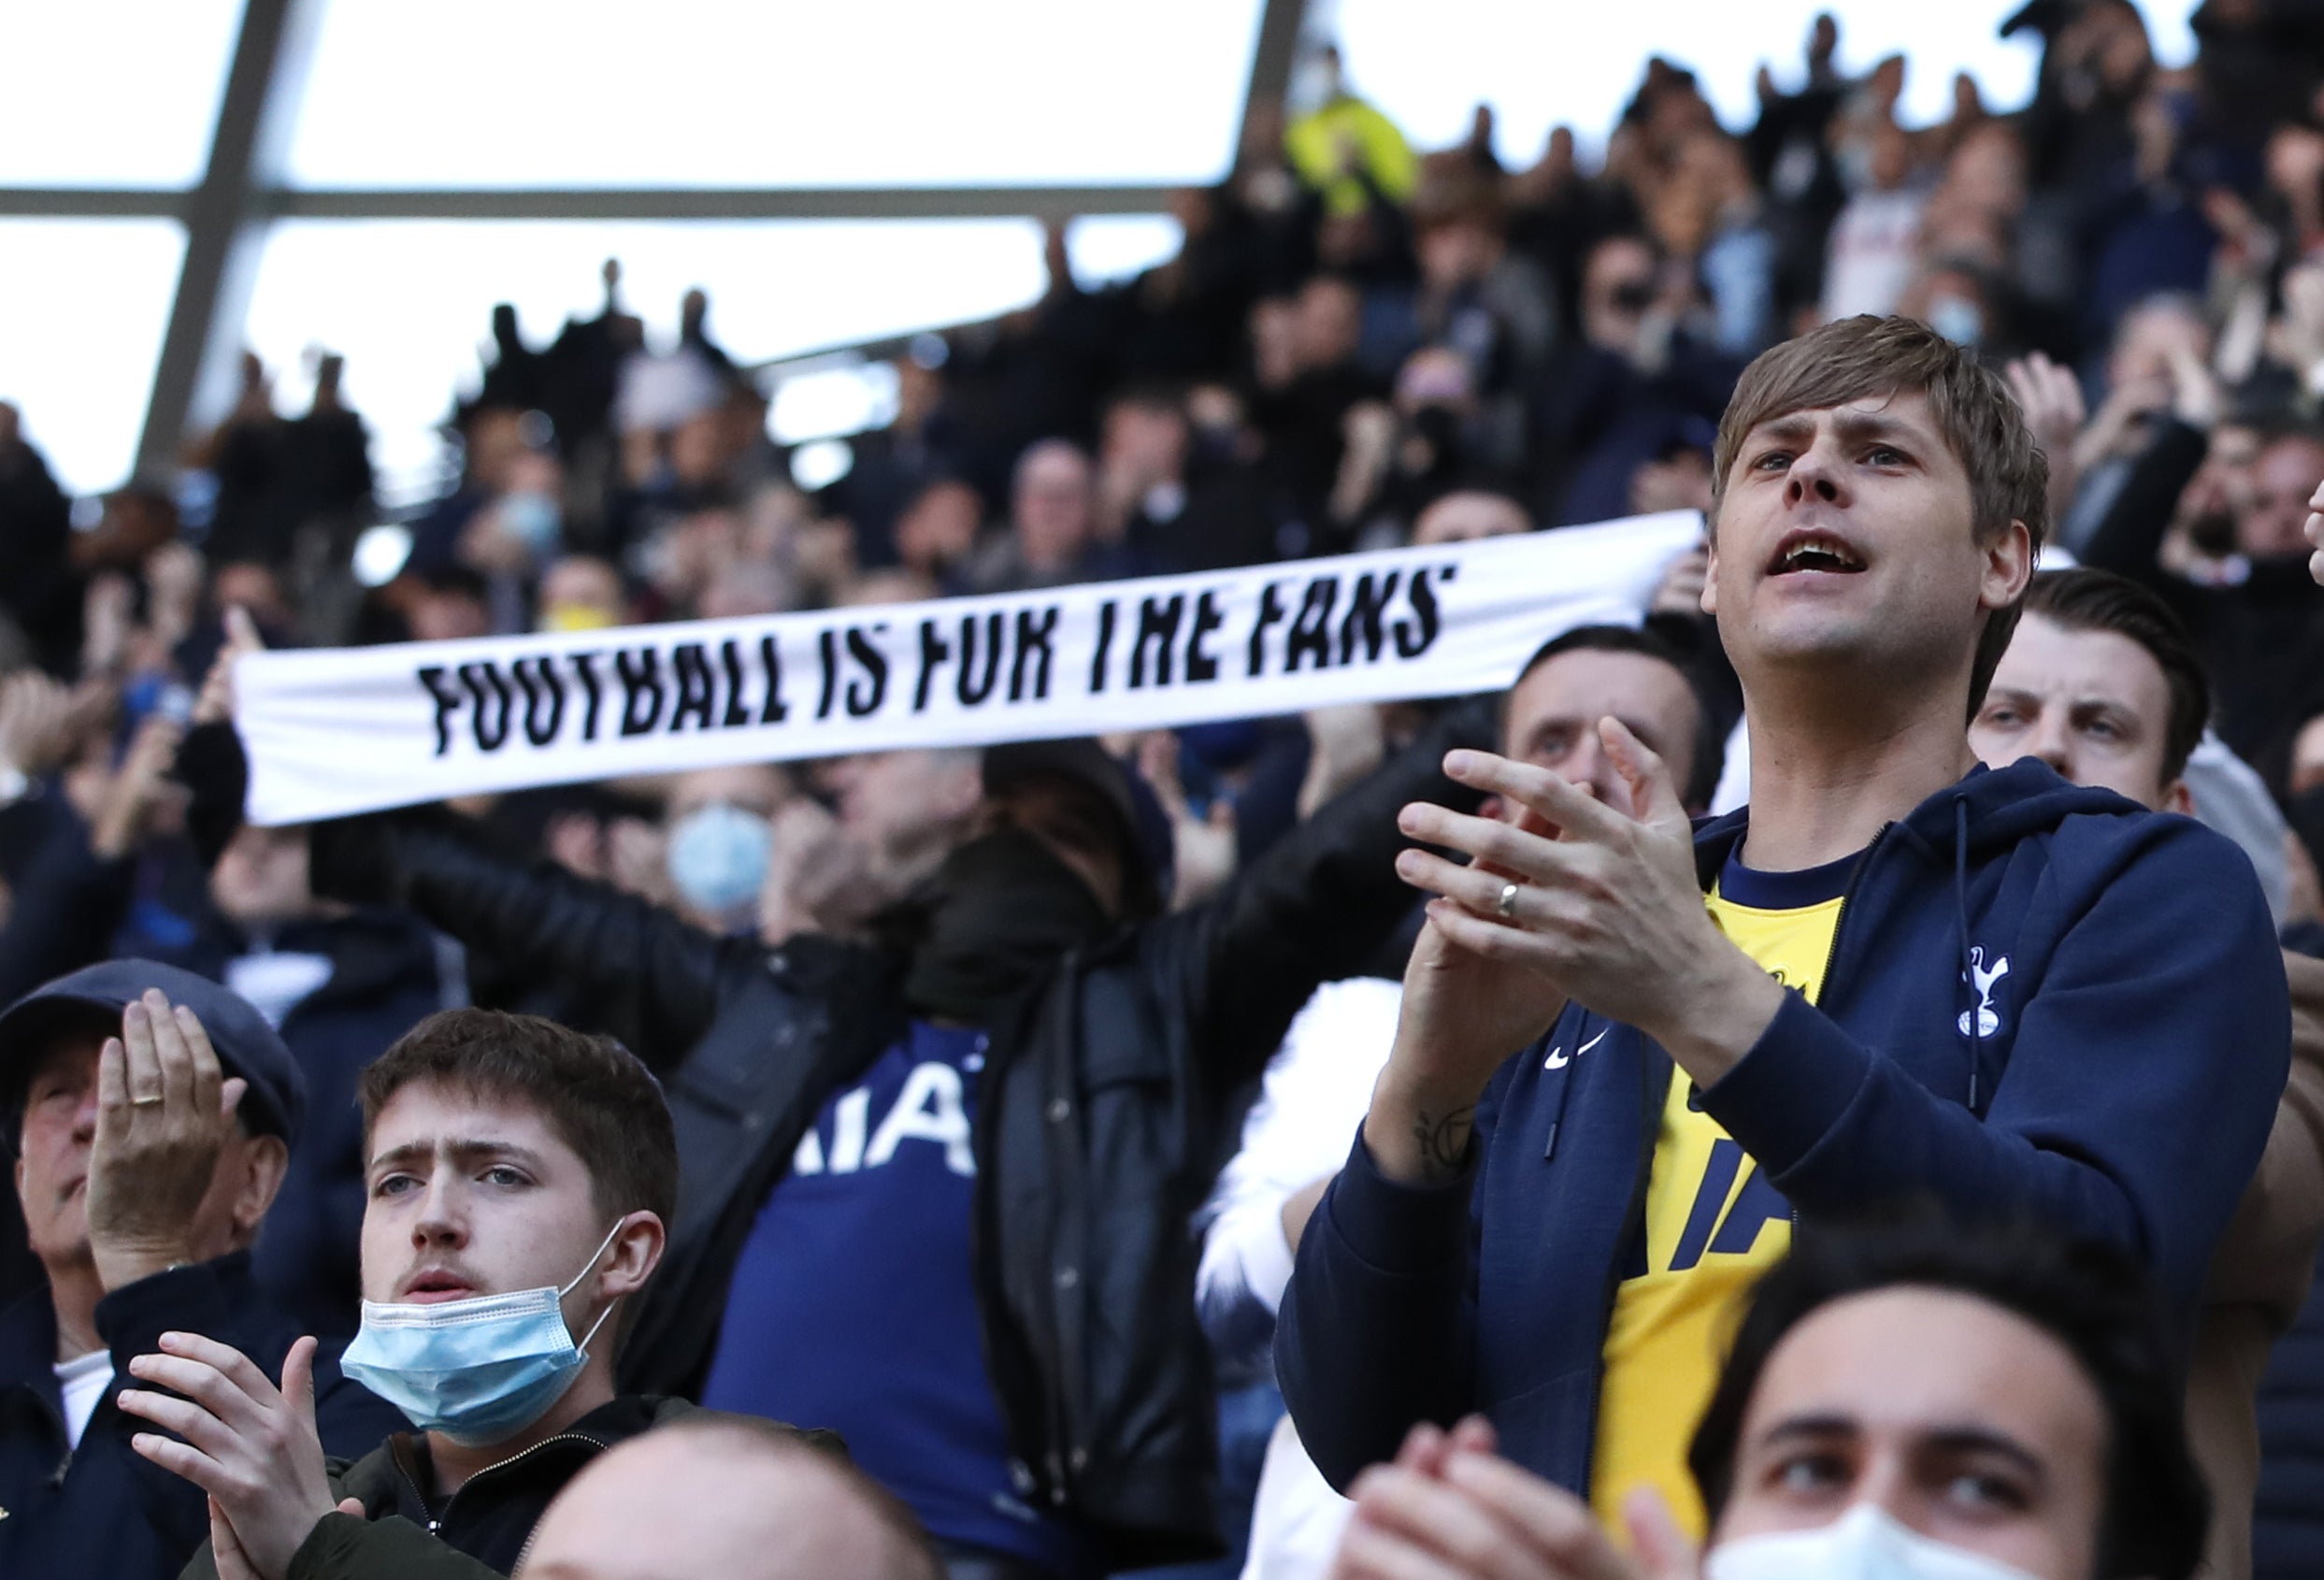 Tottenham survey 94 per cent unhappy with club's performance | The Independent